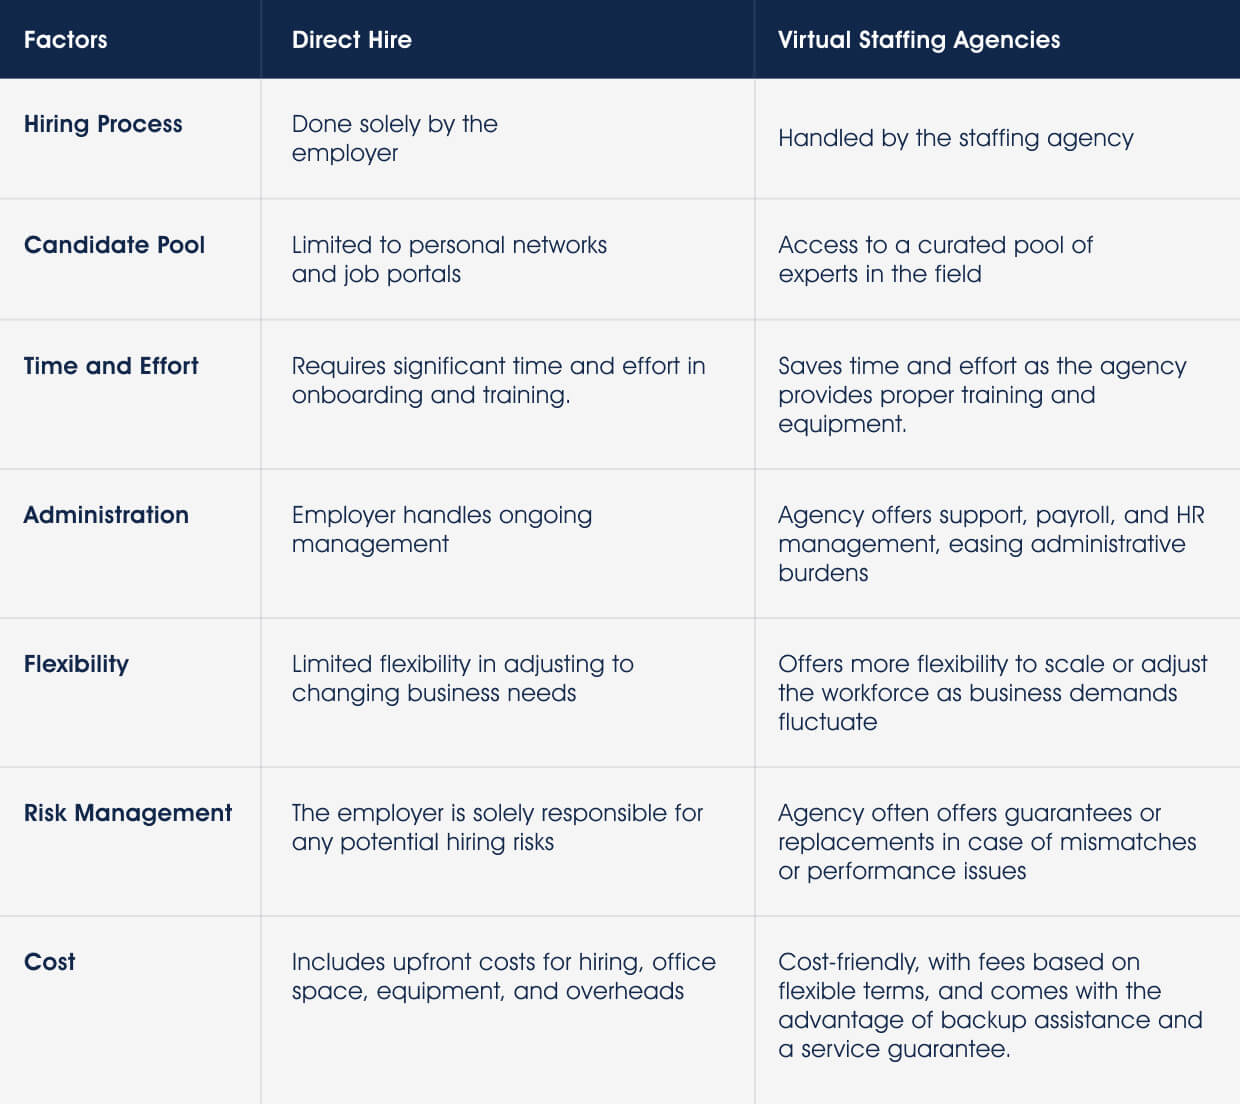 differentiation of direct hire and virtual staffing agencies based on certain factors